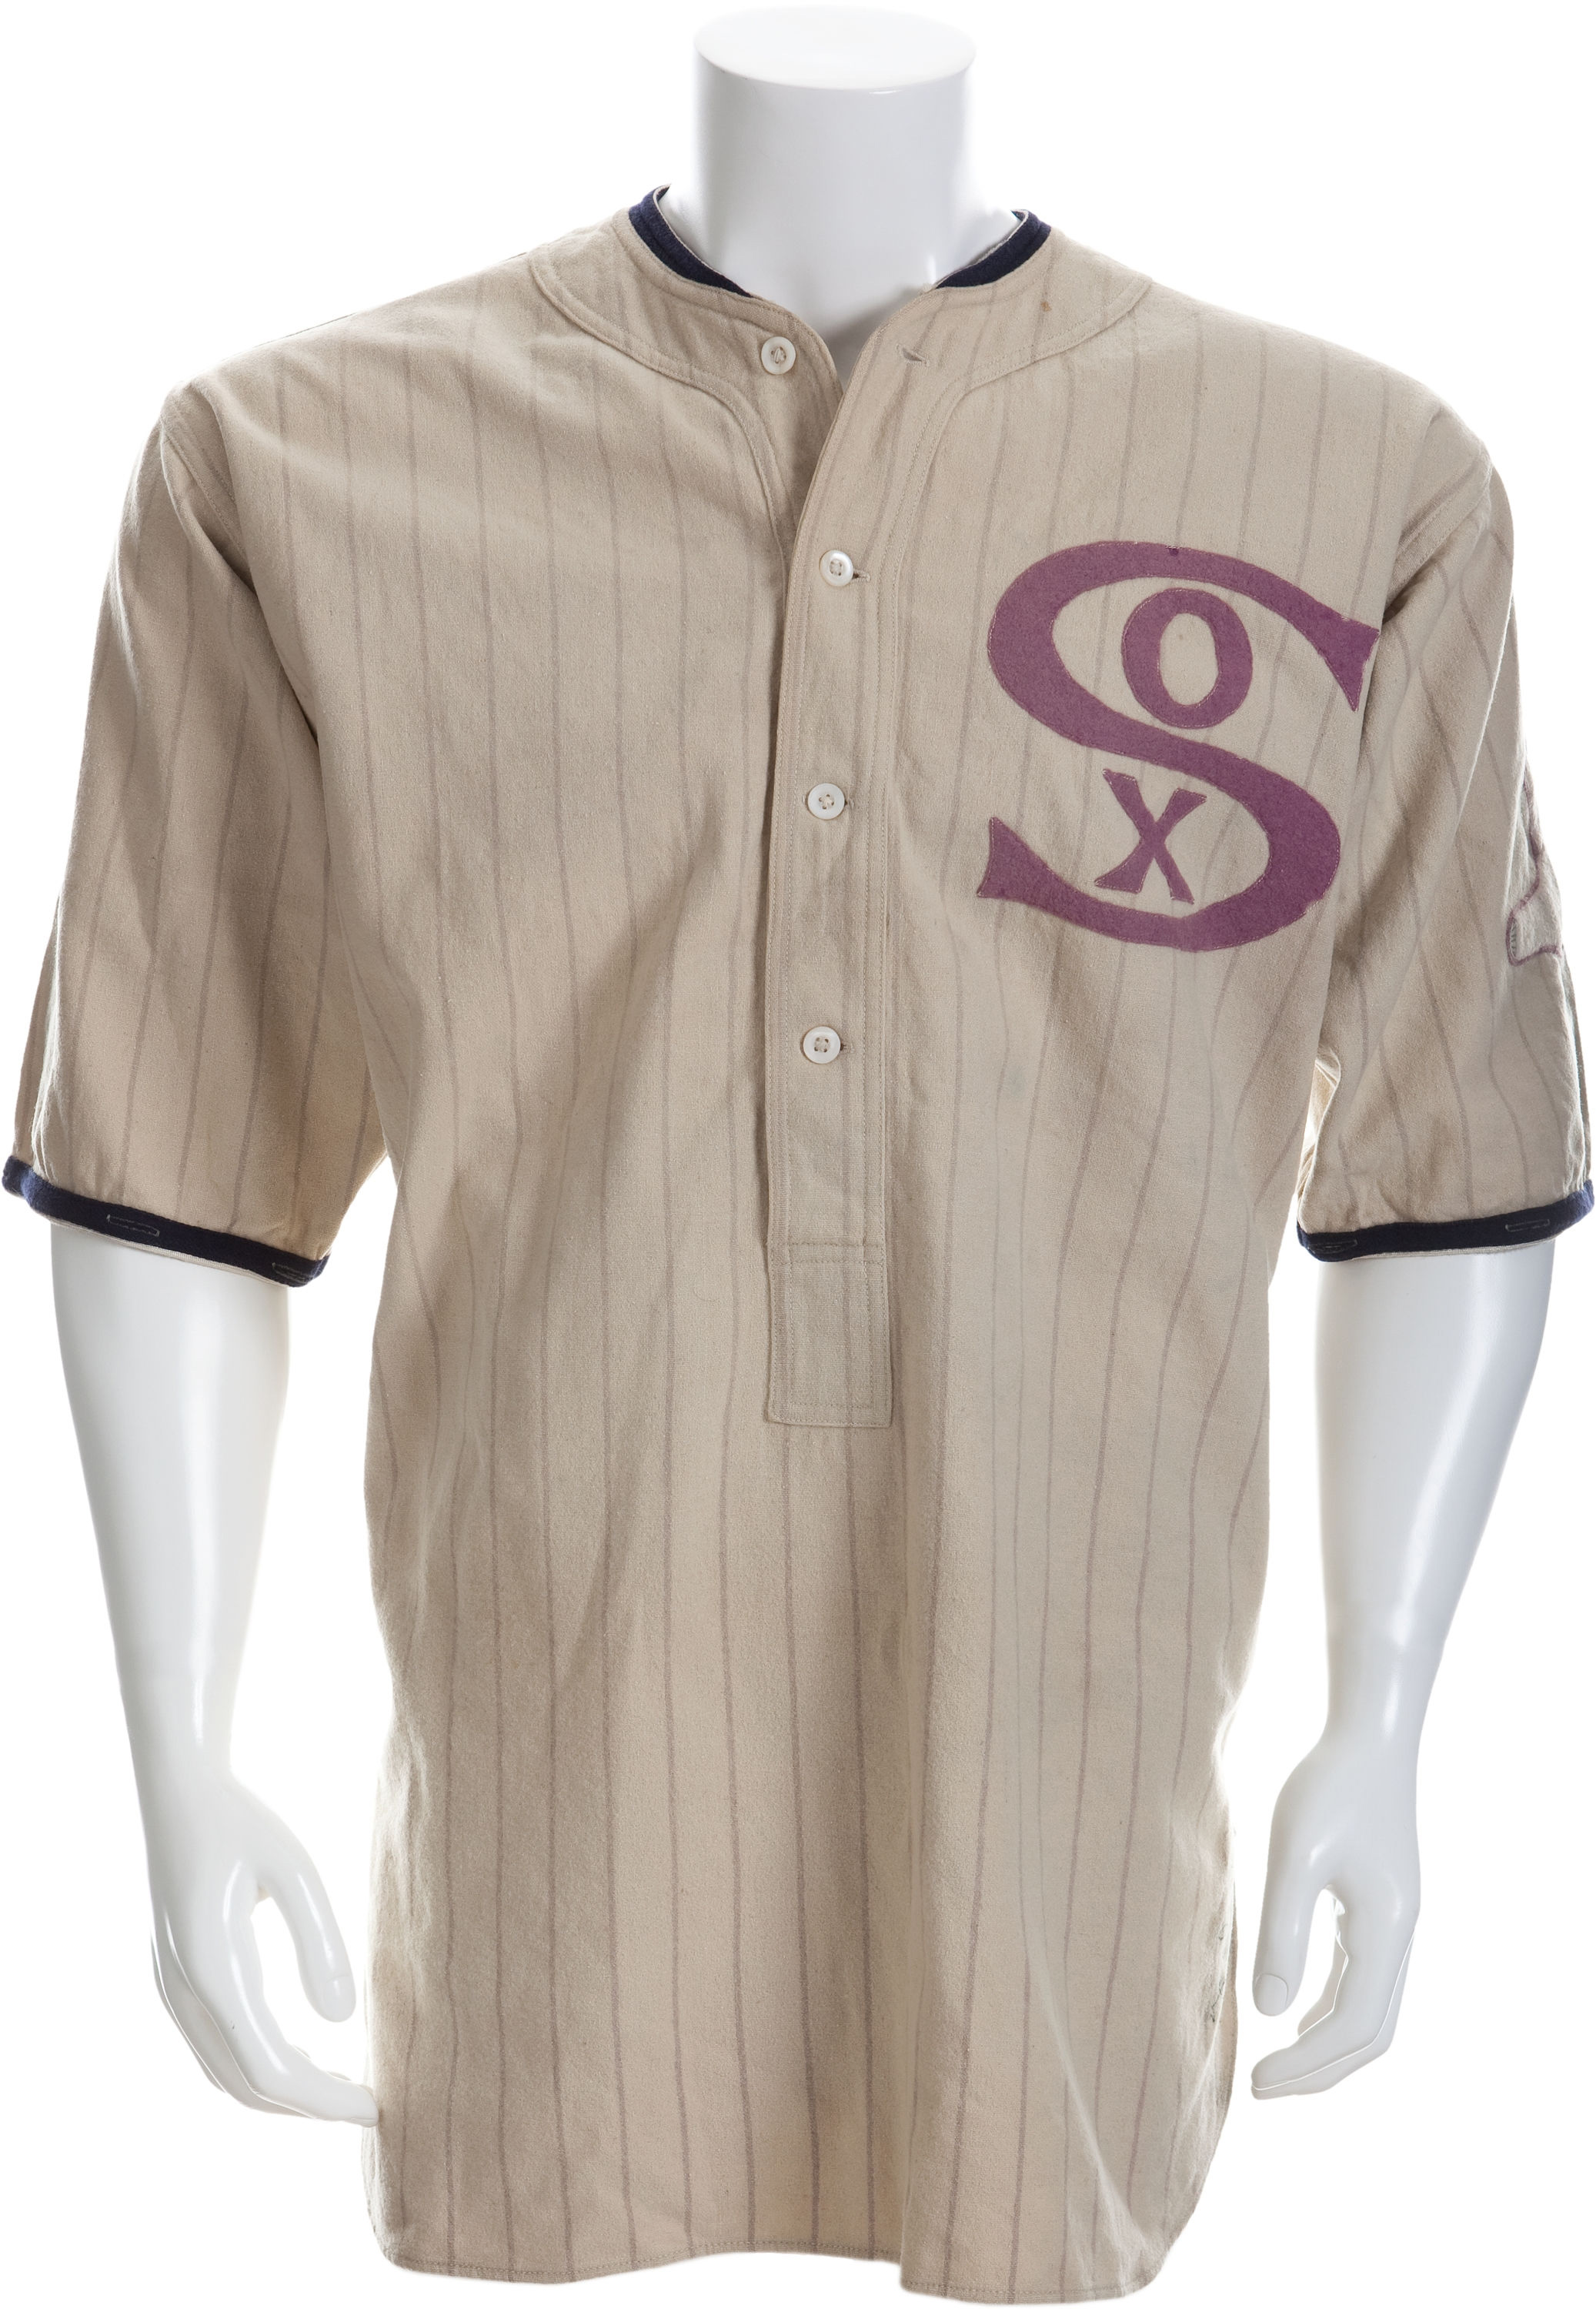 chicago black sox jersey 1919